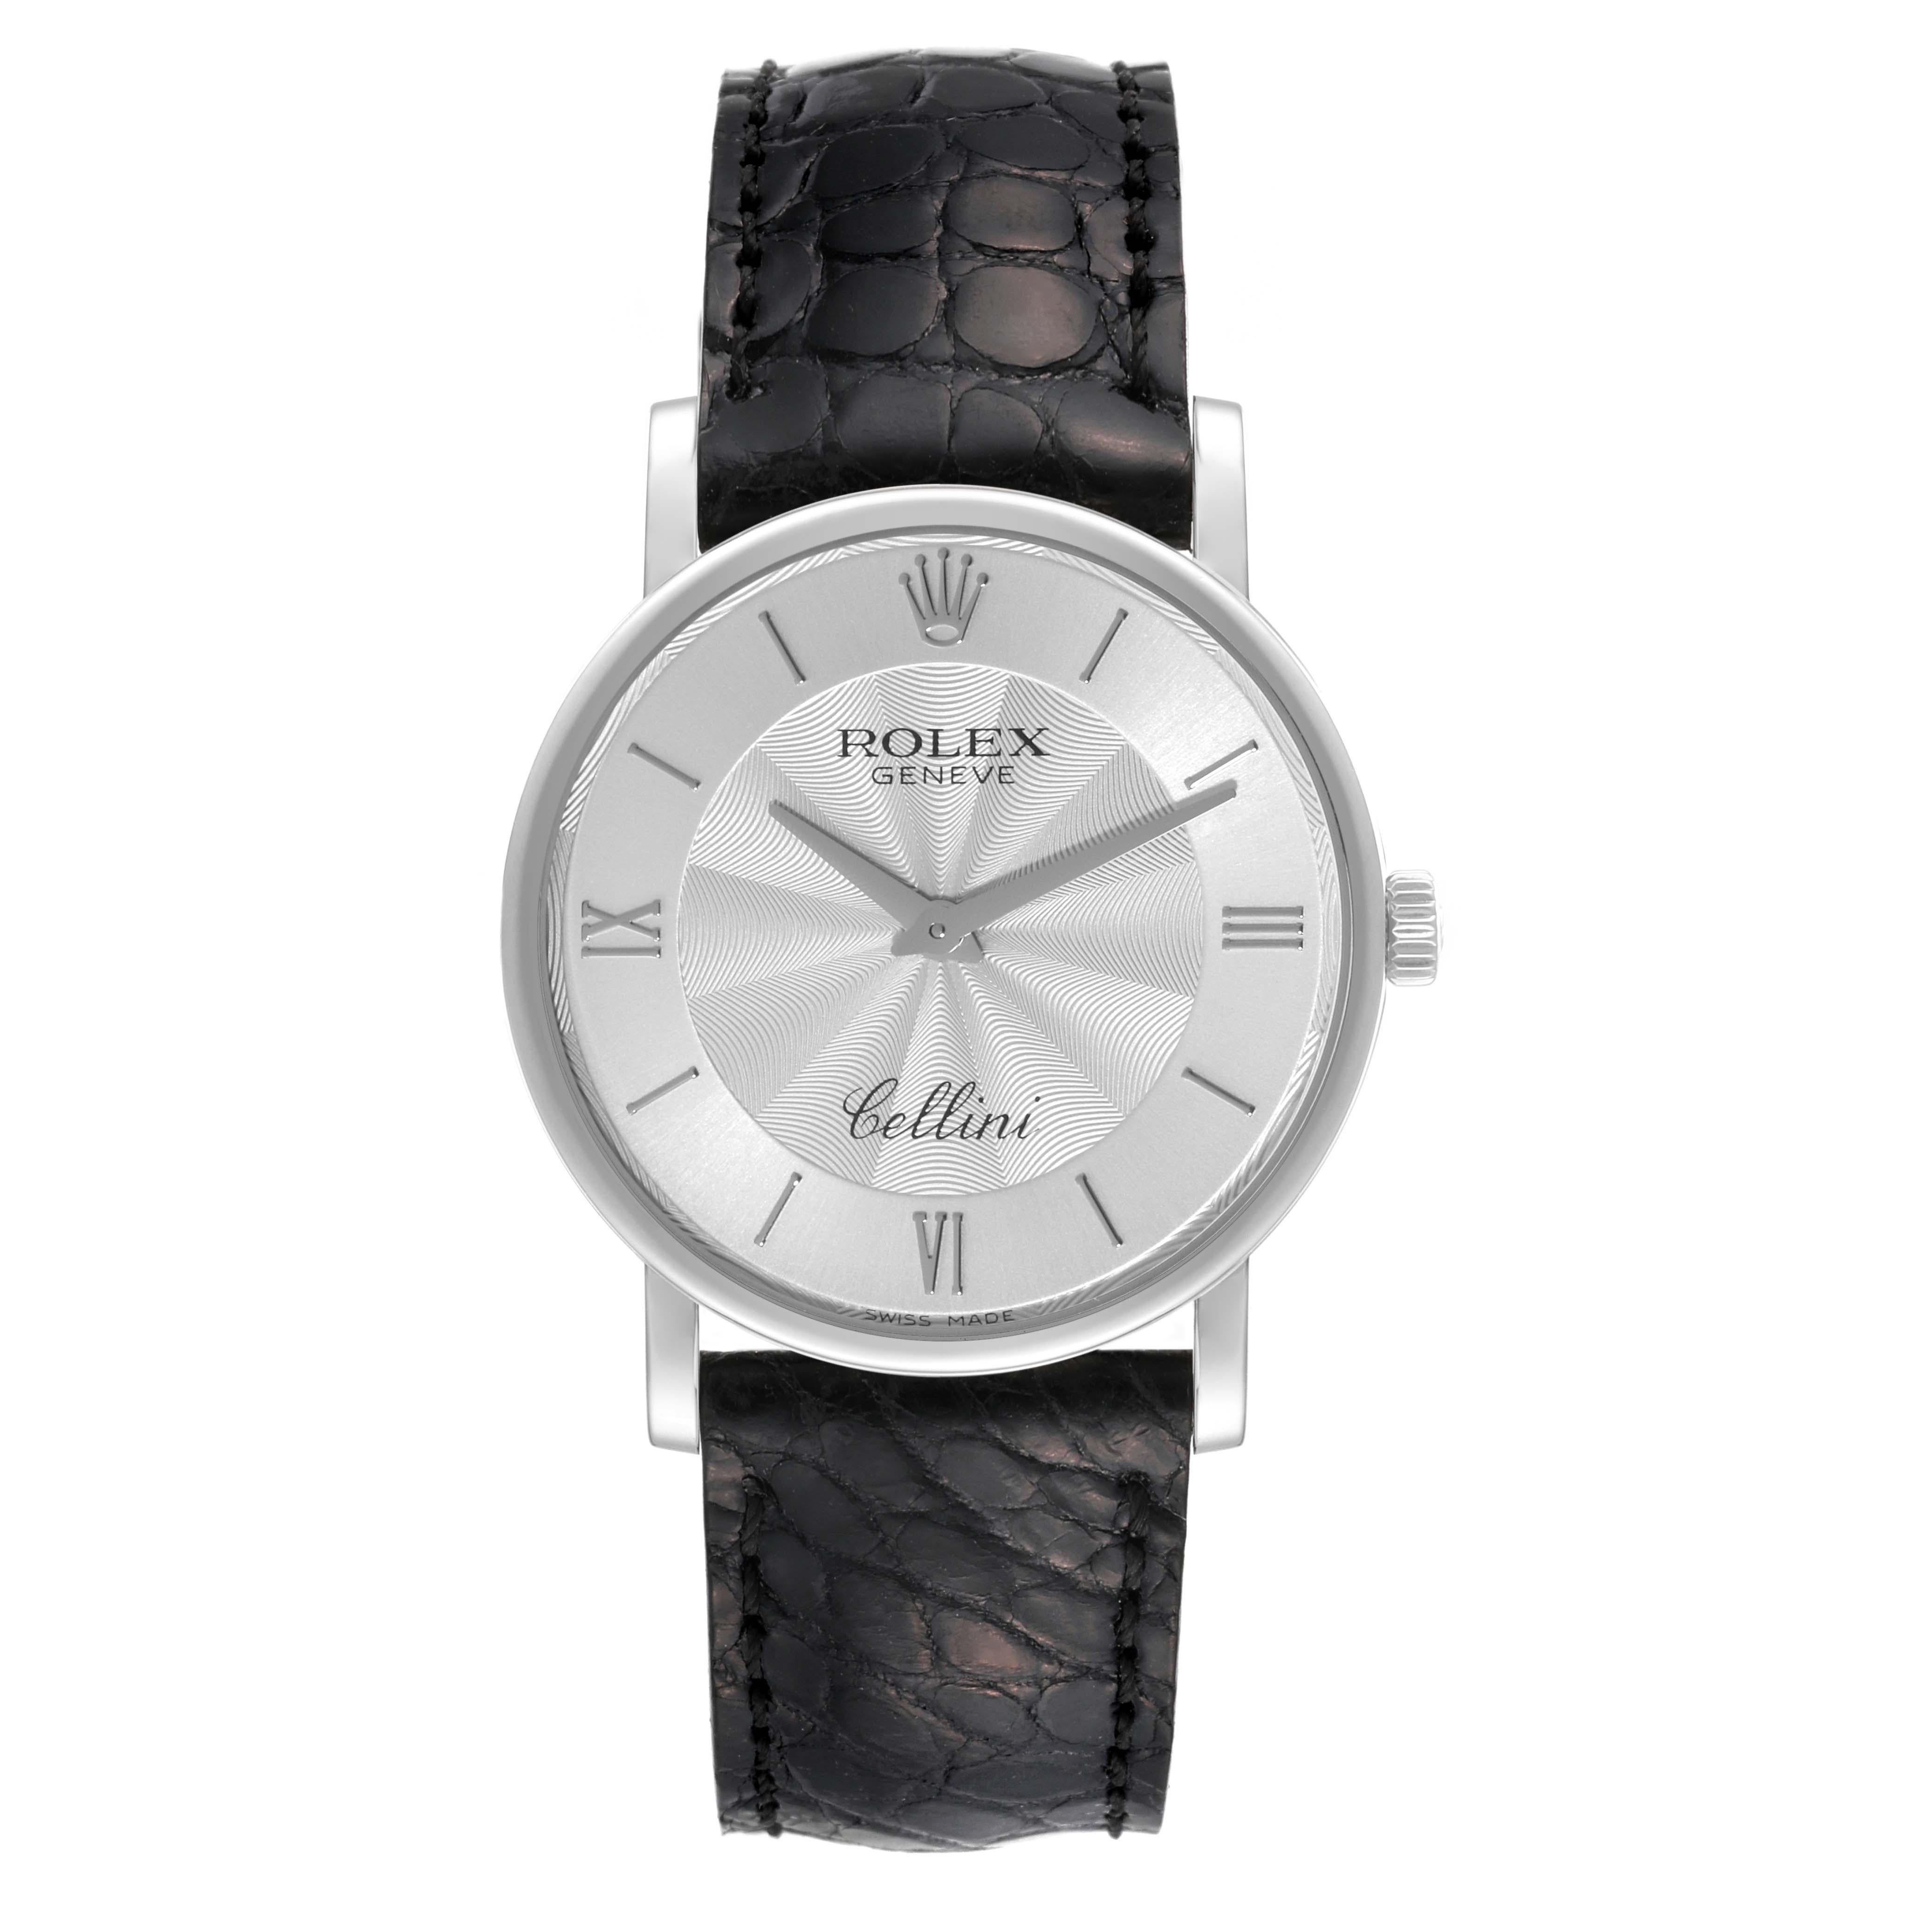 Rolex Cellini Classic White Gold Decorated Silver Dial Mens Watch 5115 Box Card. Manual winding movement. 18K white gold slim case 32 mm in diameter. 5.5 mm case thickness. Rolex logo on the crown. . Scratch resistant sapphire crystal. Flat profile.